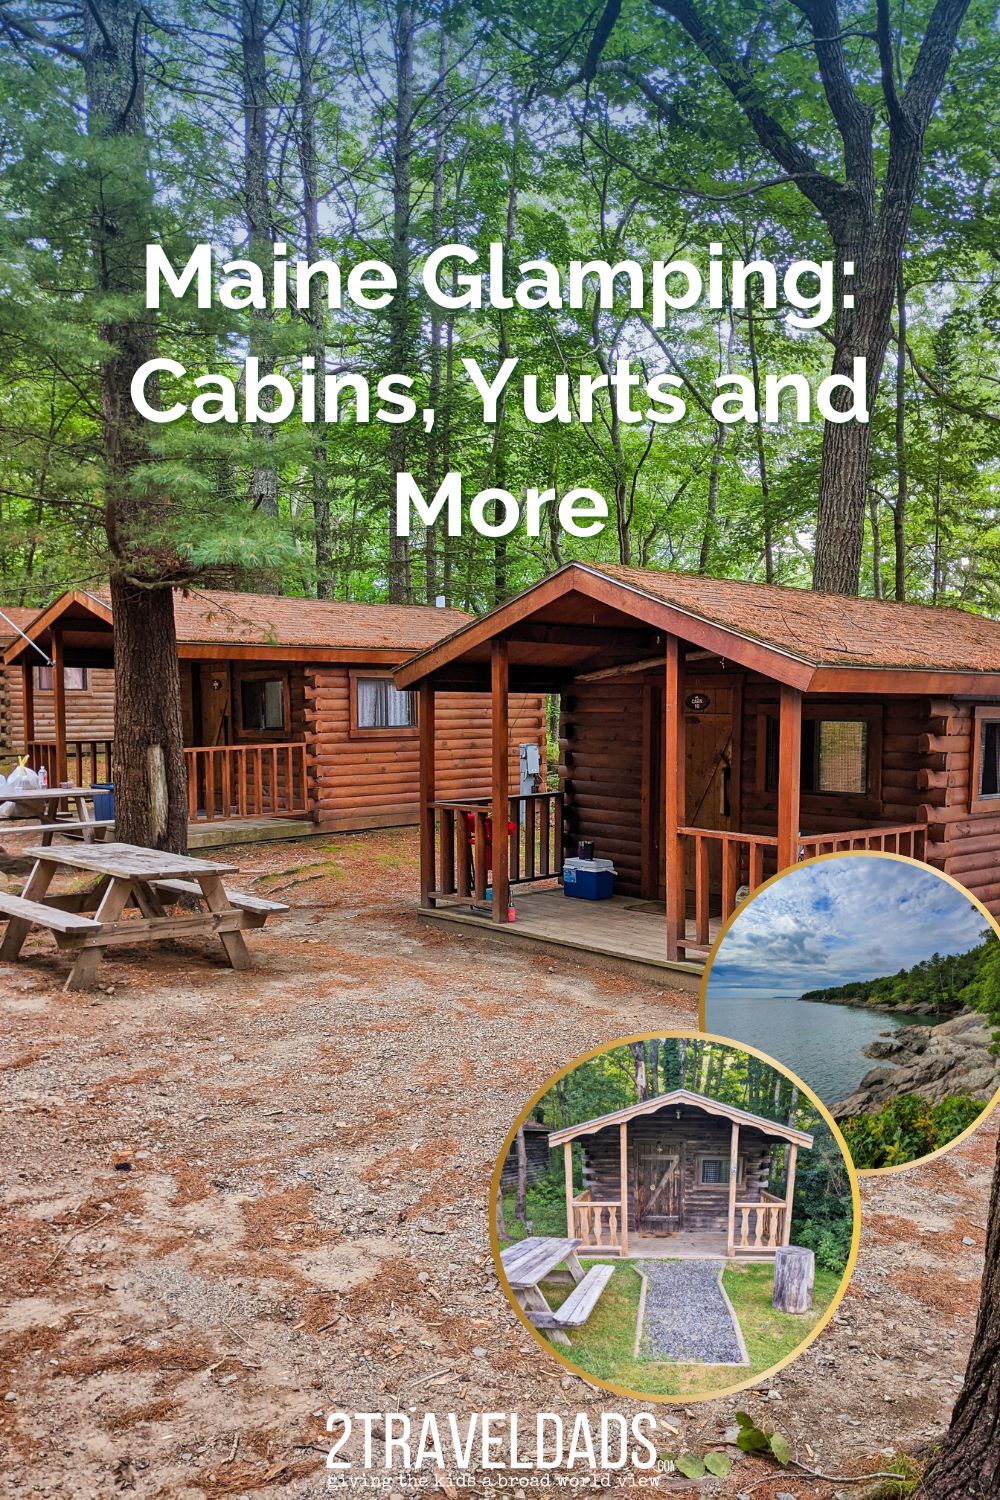 Maine is a great place to get in touch with nature and just spend time outdoors. Though not all of us like to rough it there are still plenty of options when wanting to check Maine glamping off your bucket list!